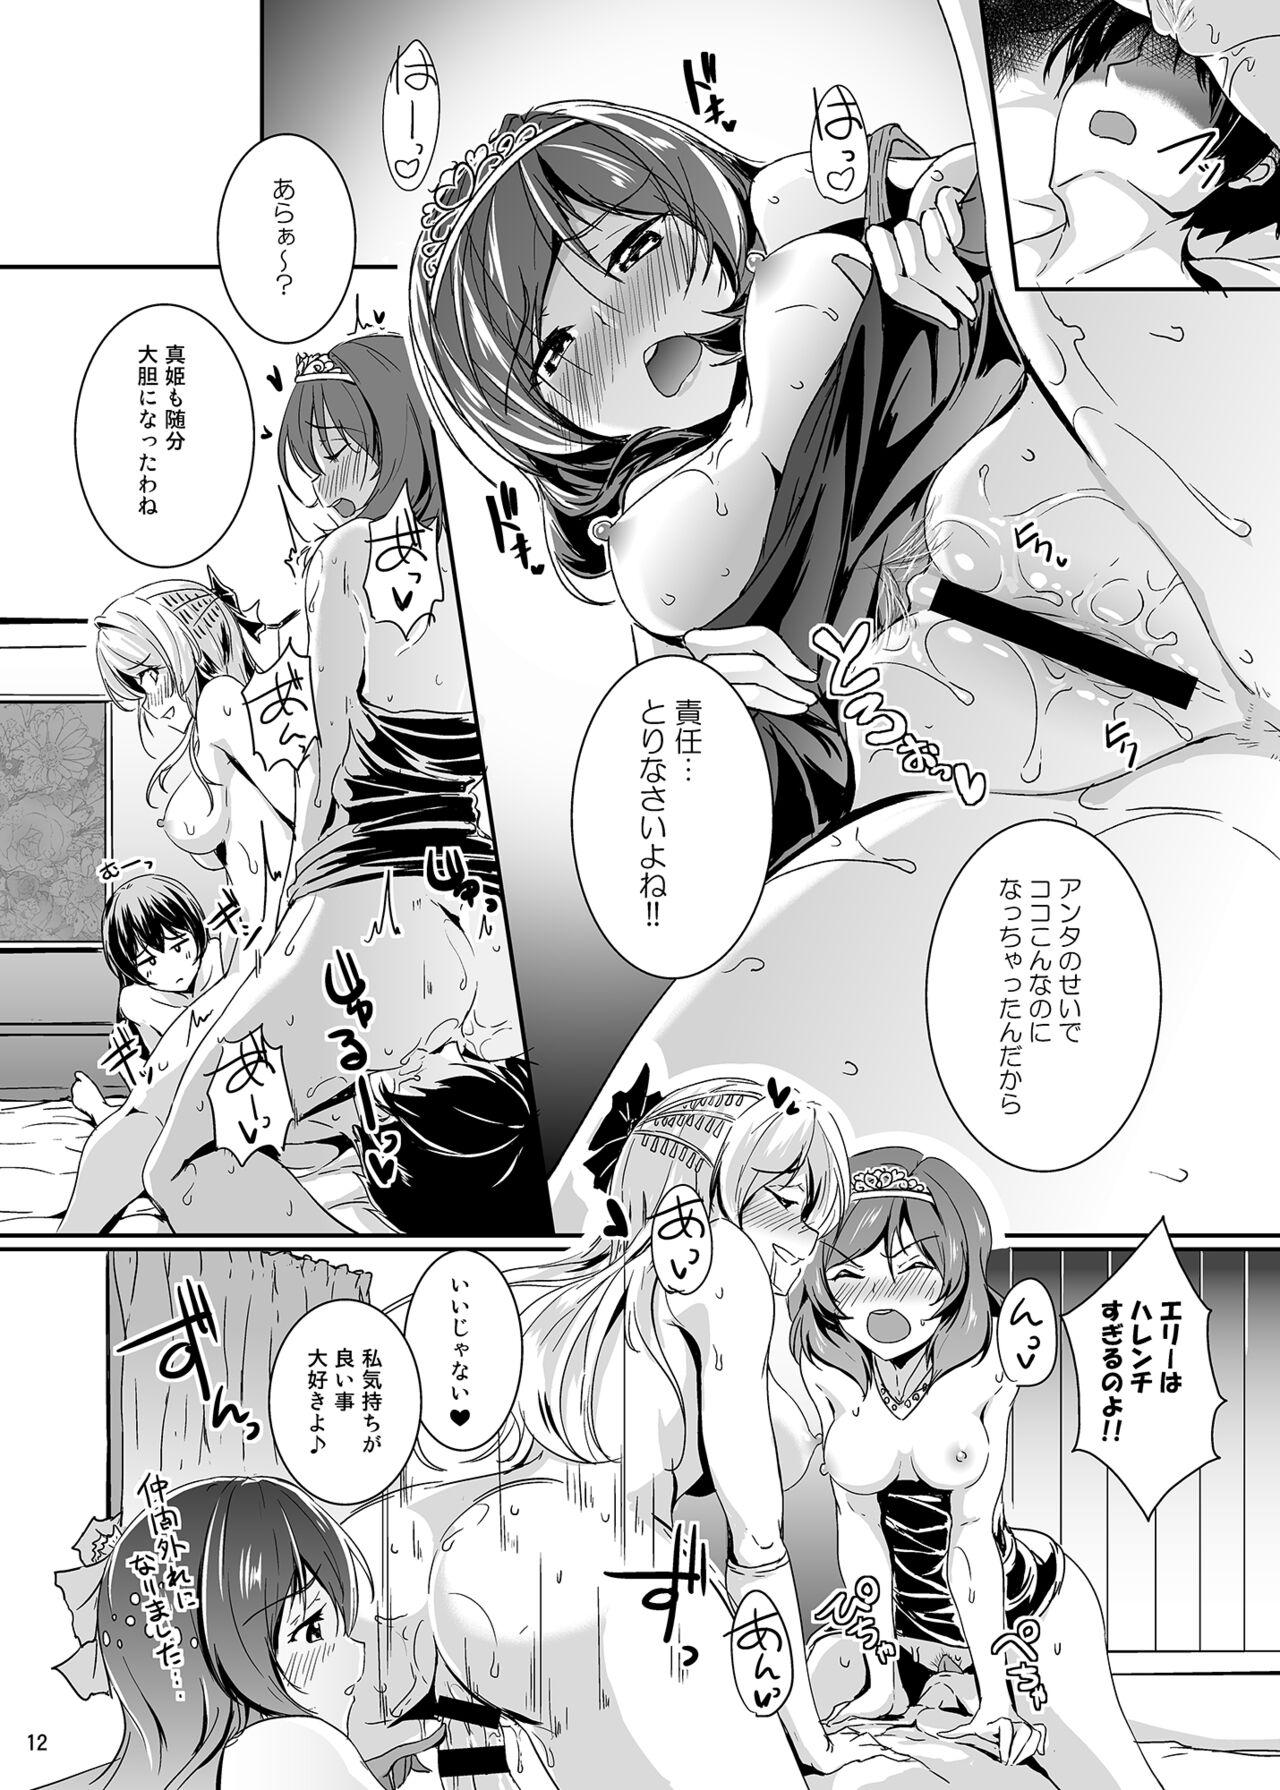 Actress secret in my heart - Love live Innocent - Page 12